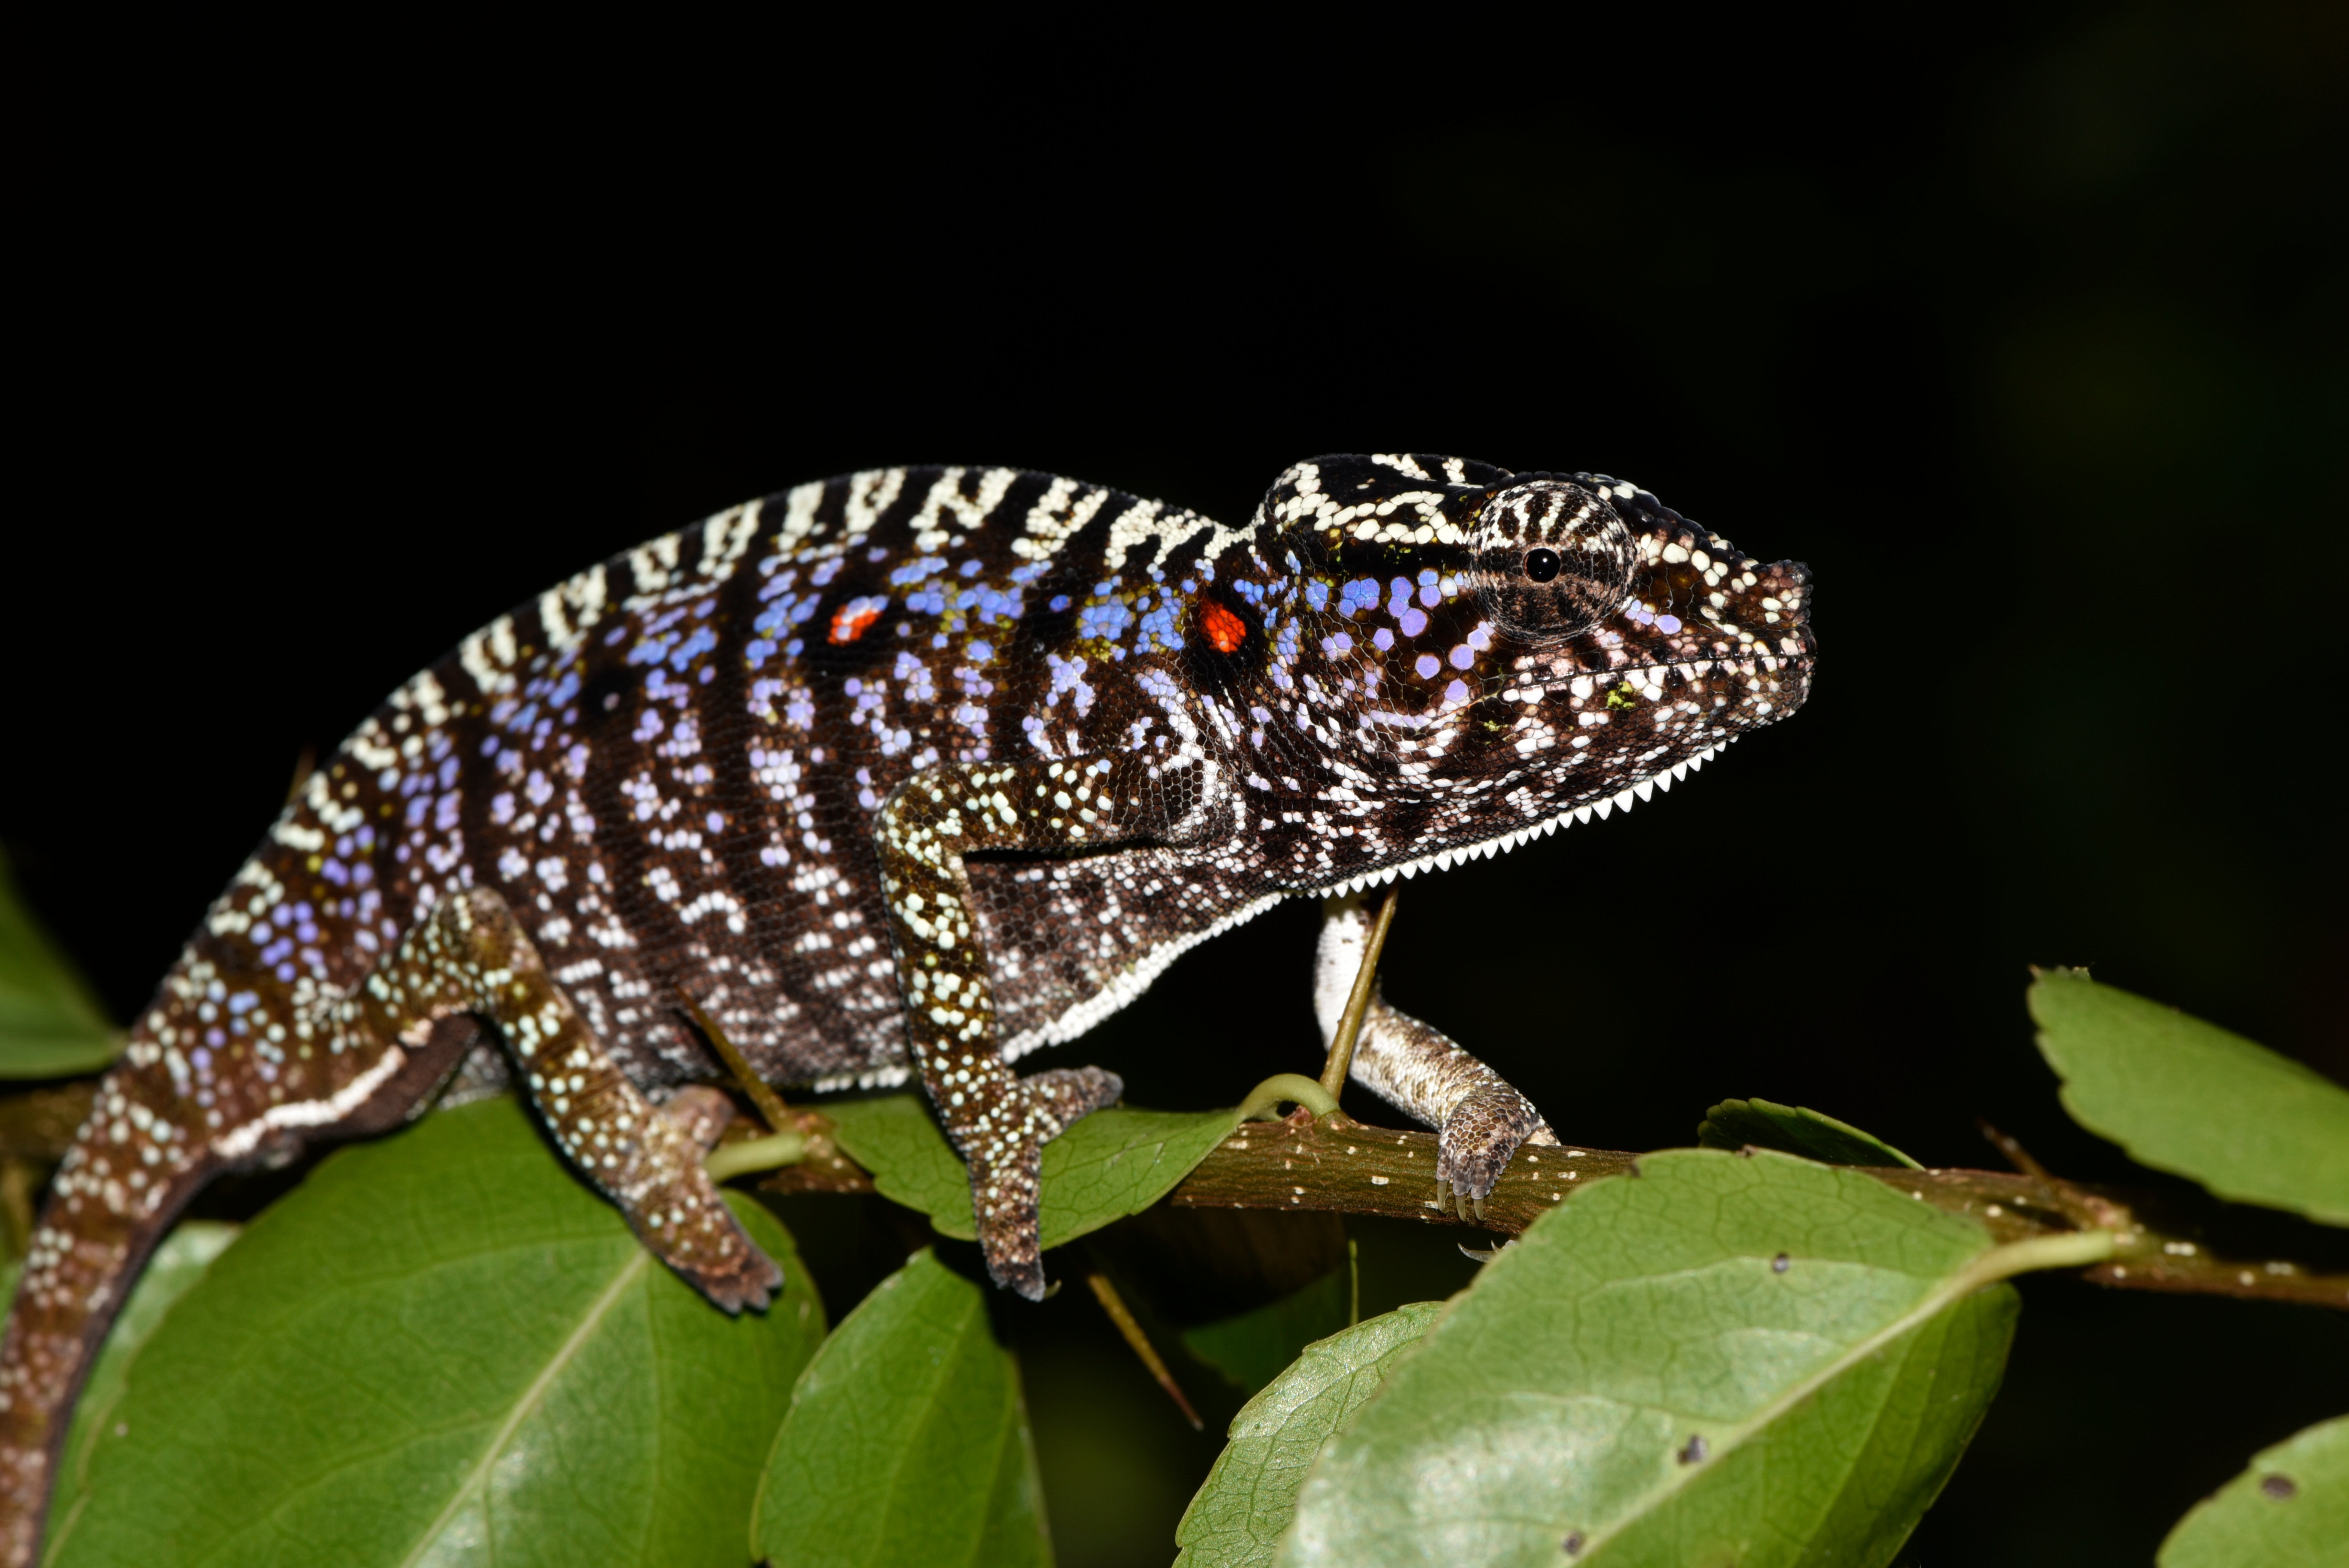 Scientists find Madagascar chameleon last seen 100 years ago species  Madagascar Scientists camouflage researchers